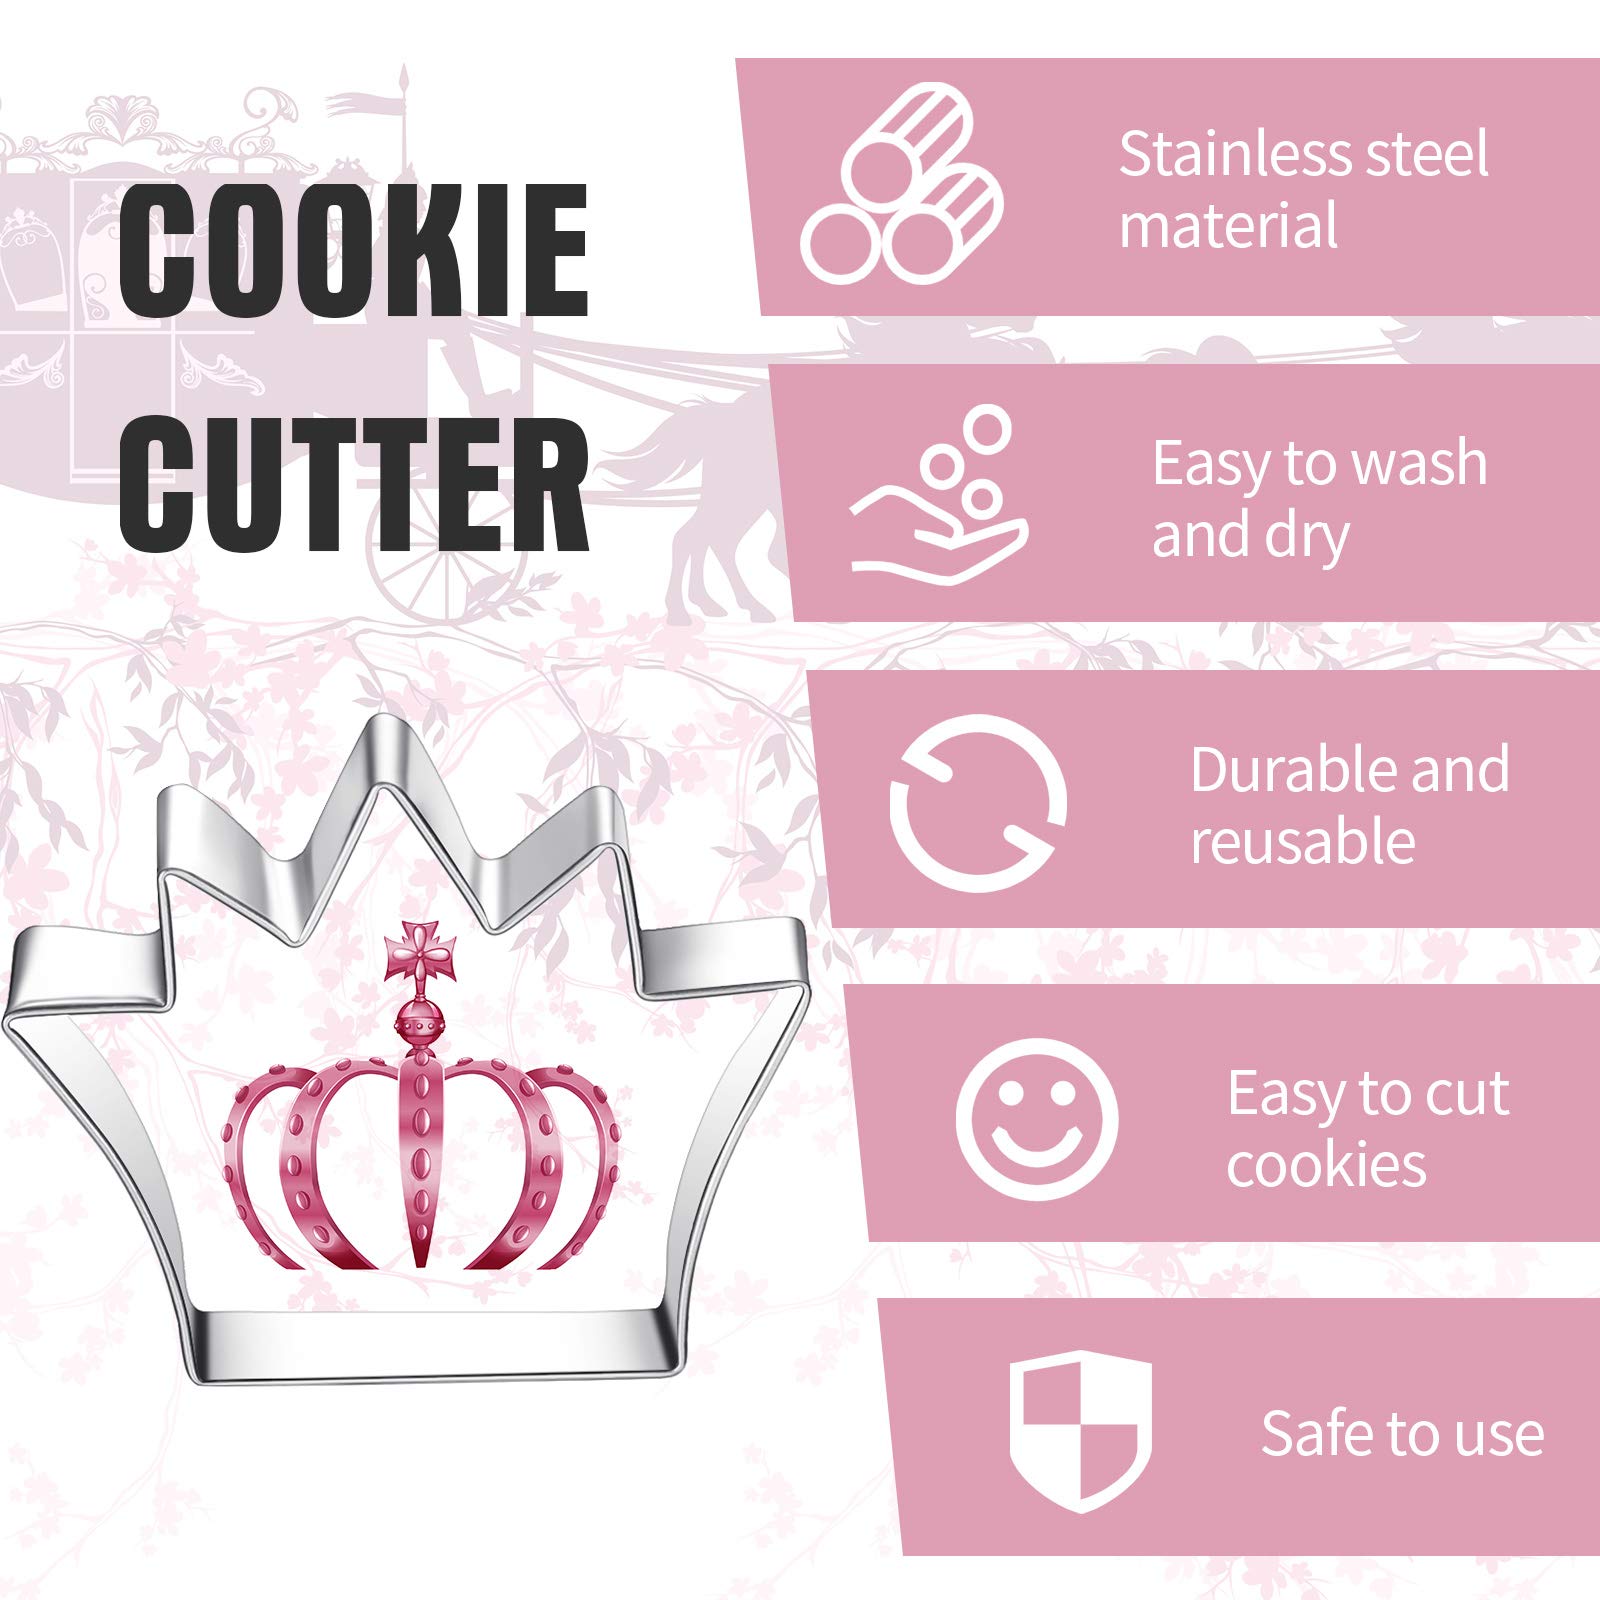 8 Pieces Princess Cookie Cutter Set with Crown, Dress, Castles, Unicorn Head Shapes Stainless Steel Fondant Biscuit Cutters and 6 Pieces Sugar Stirring Pins